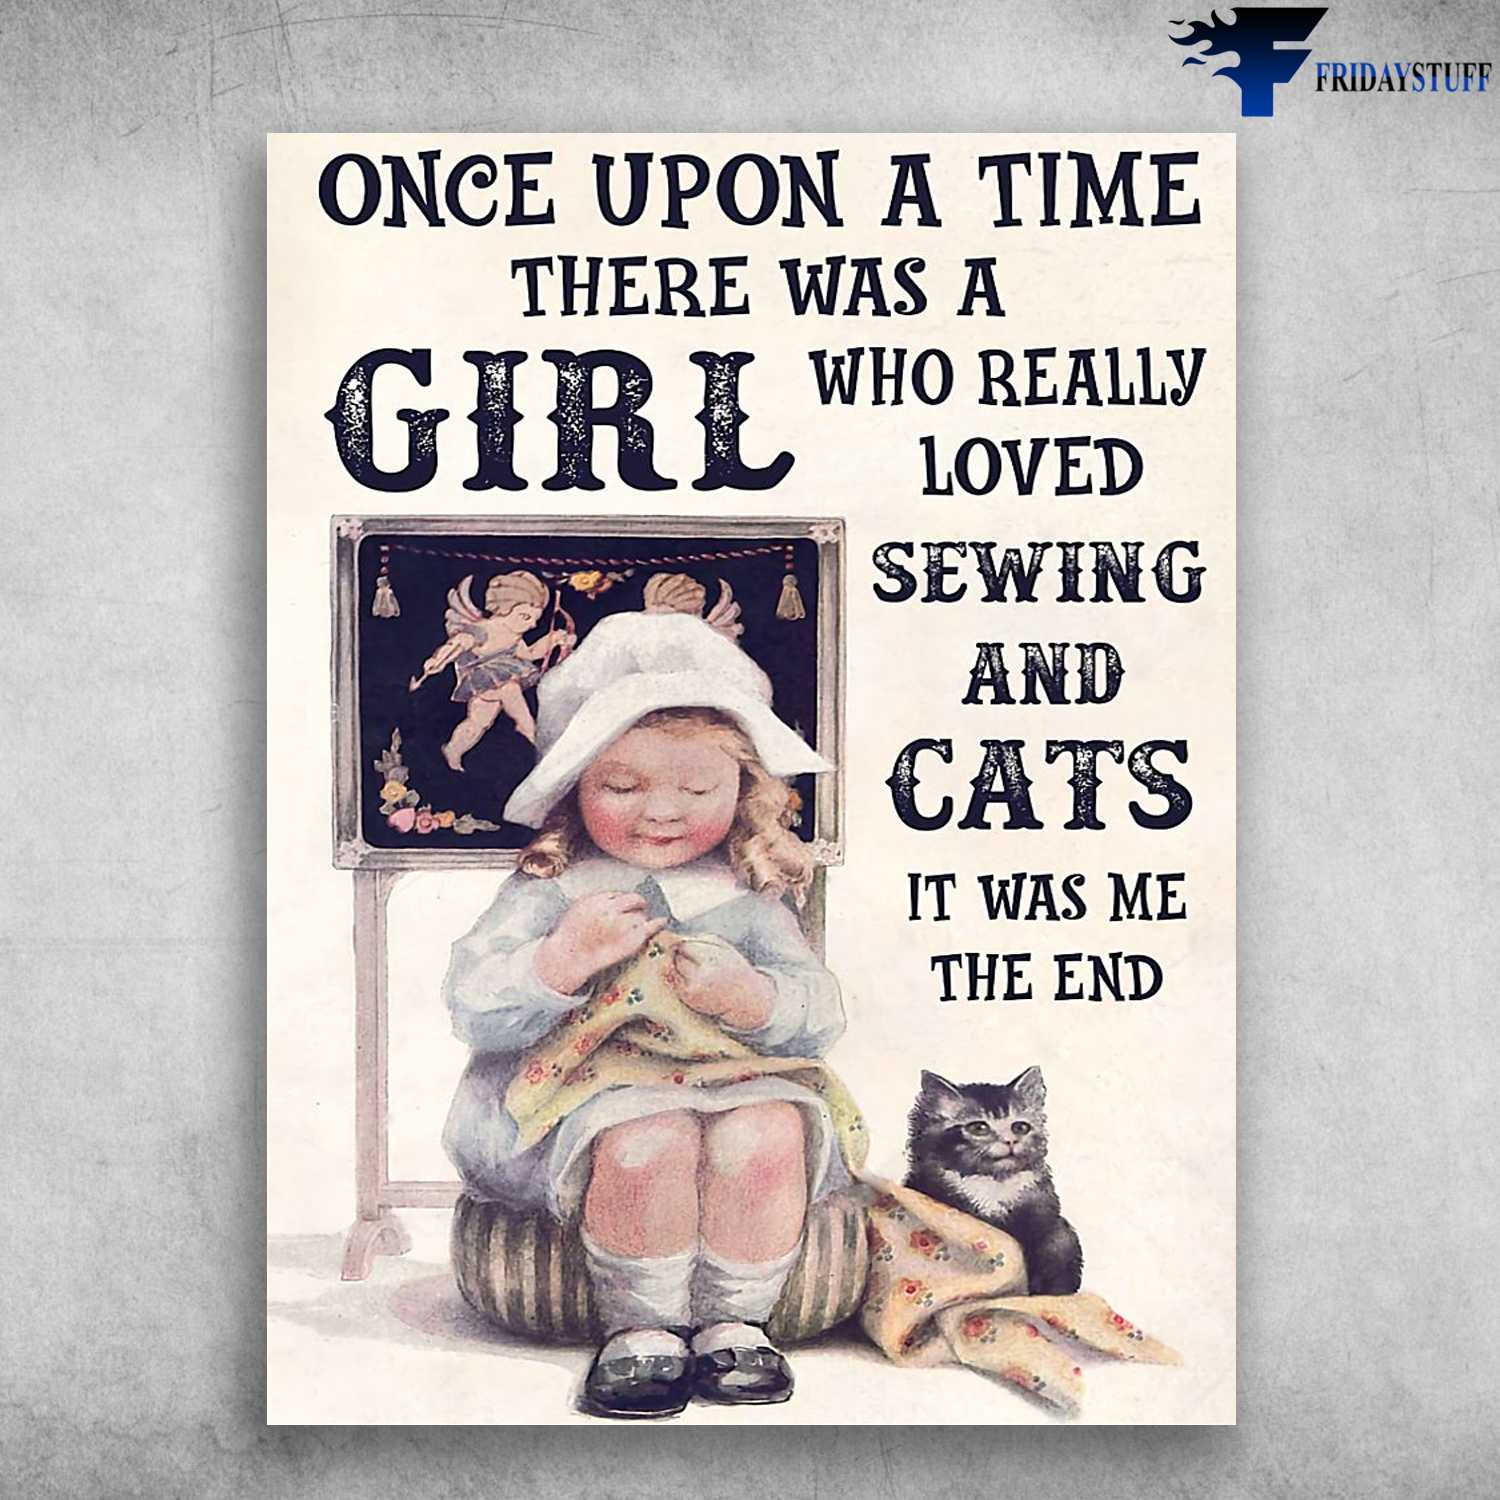 Cat Lover, Little Girl Loves Cat - Once Upon A Time, There Was A Girl, Who Really Loved, Sewing And Cats, It Was Me, The End